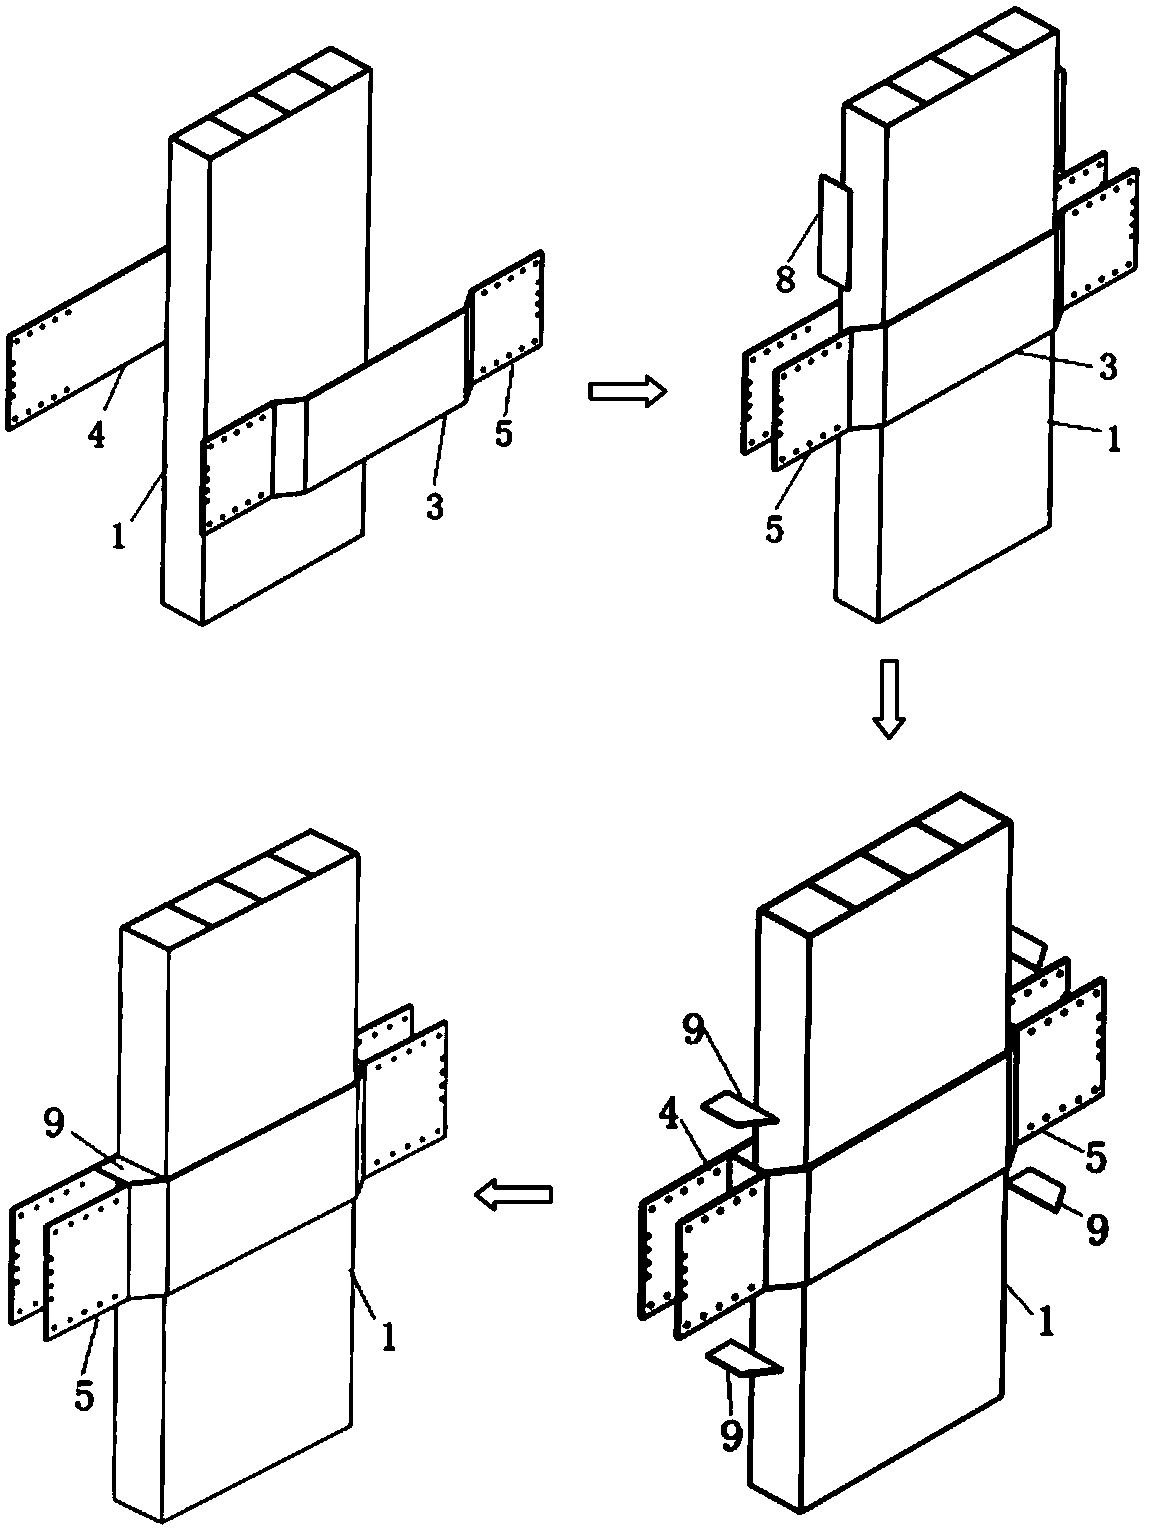 A bolt connection node and assembly method for eccentric beam-column